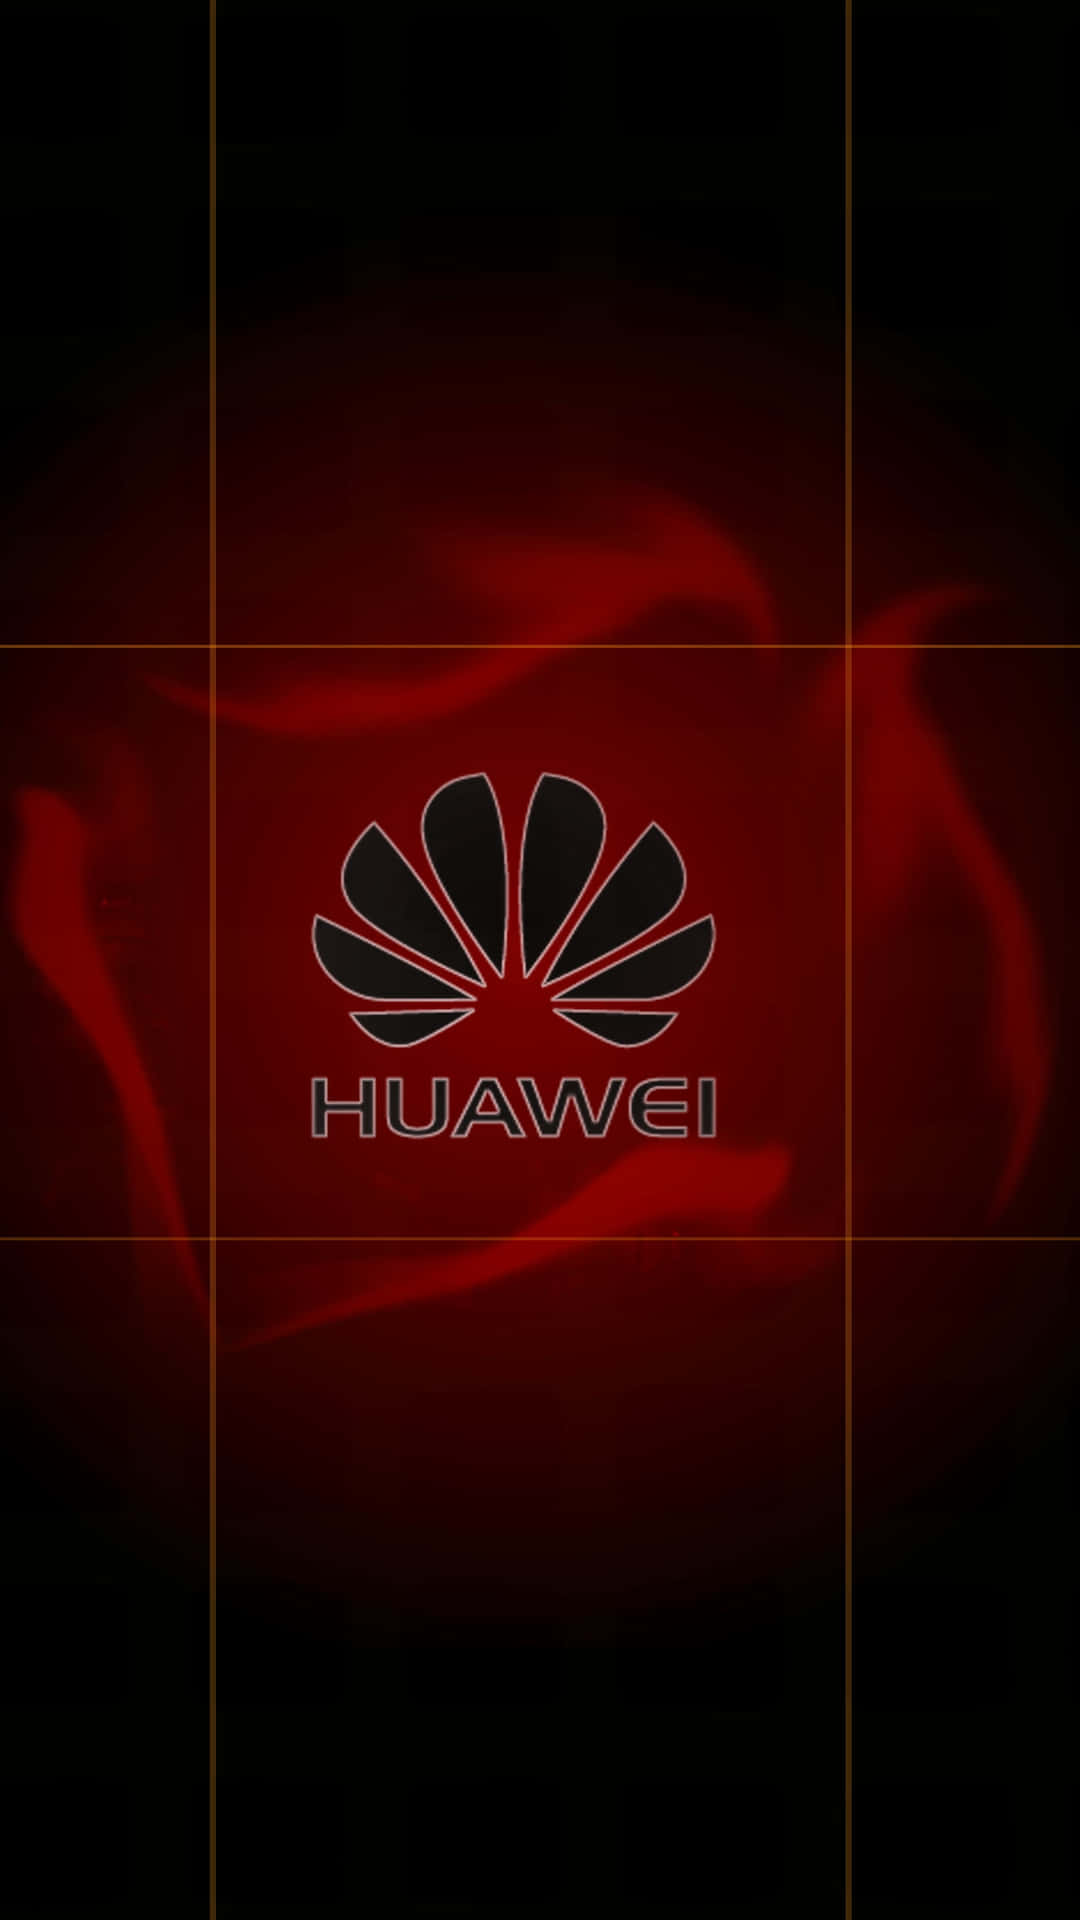 The Huawei Logo Amongst the Clouds